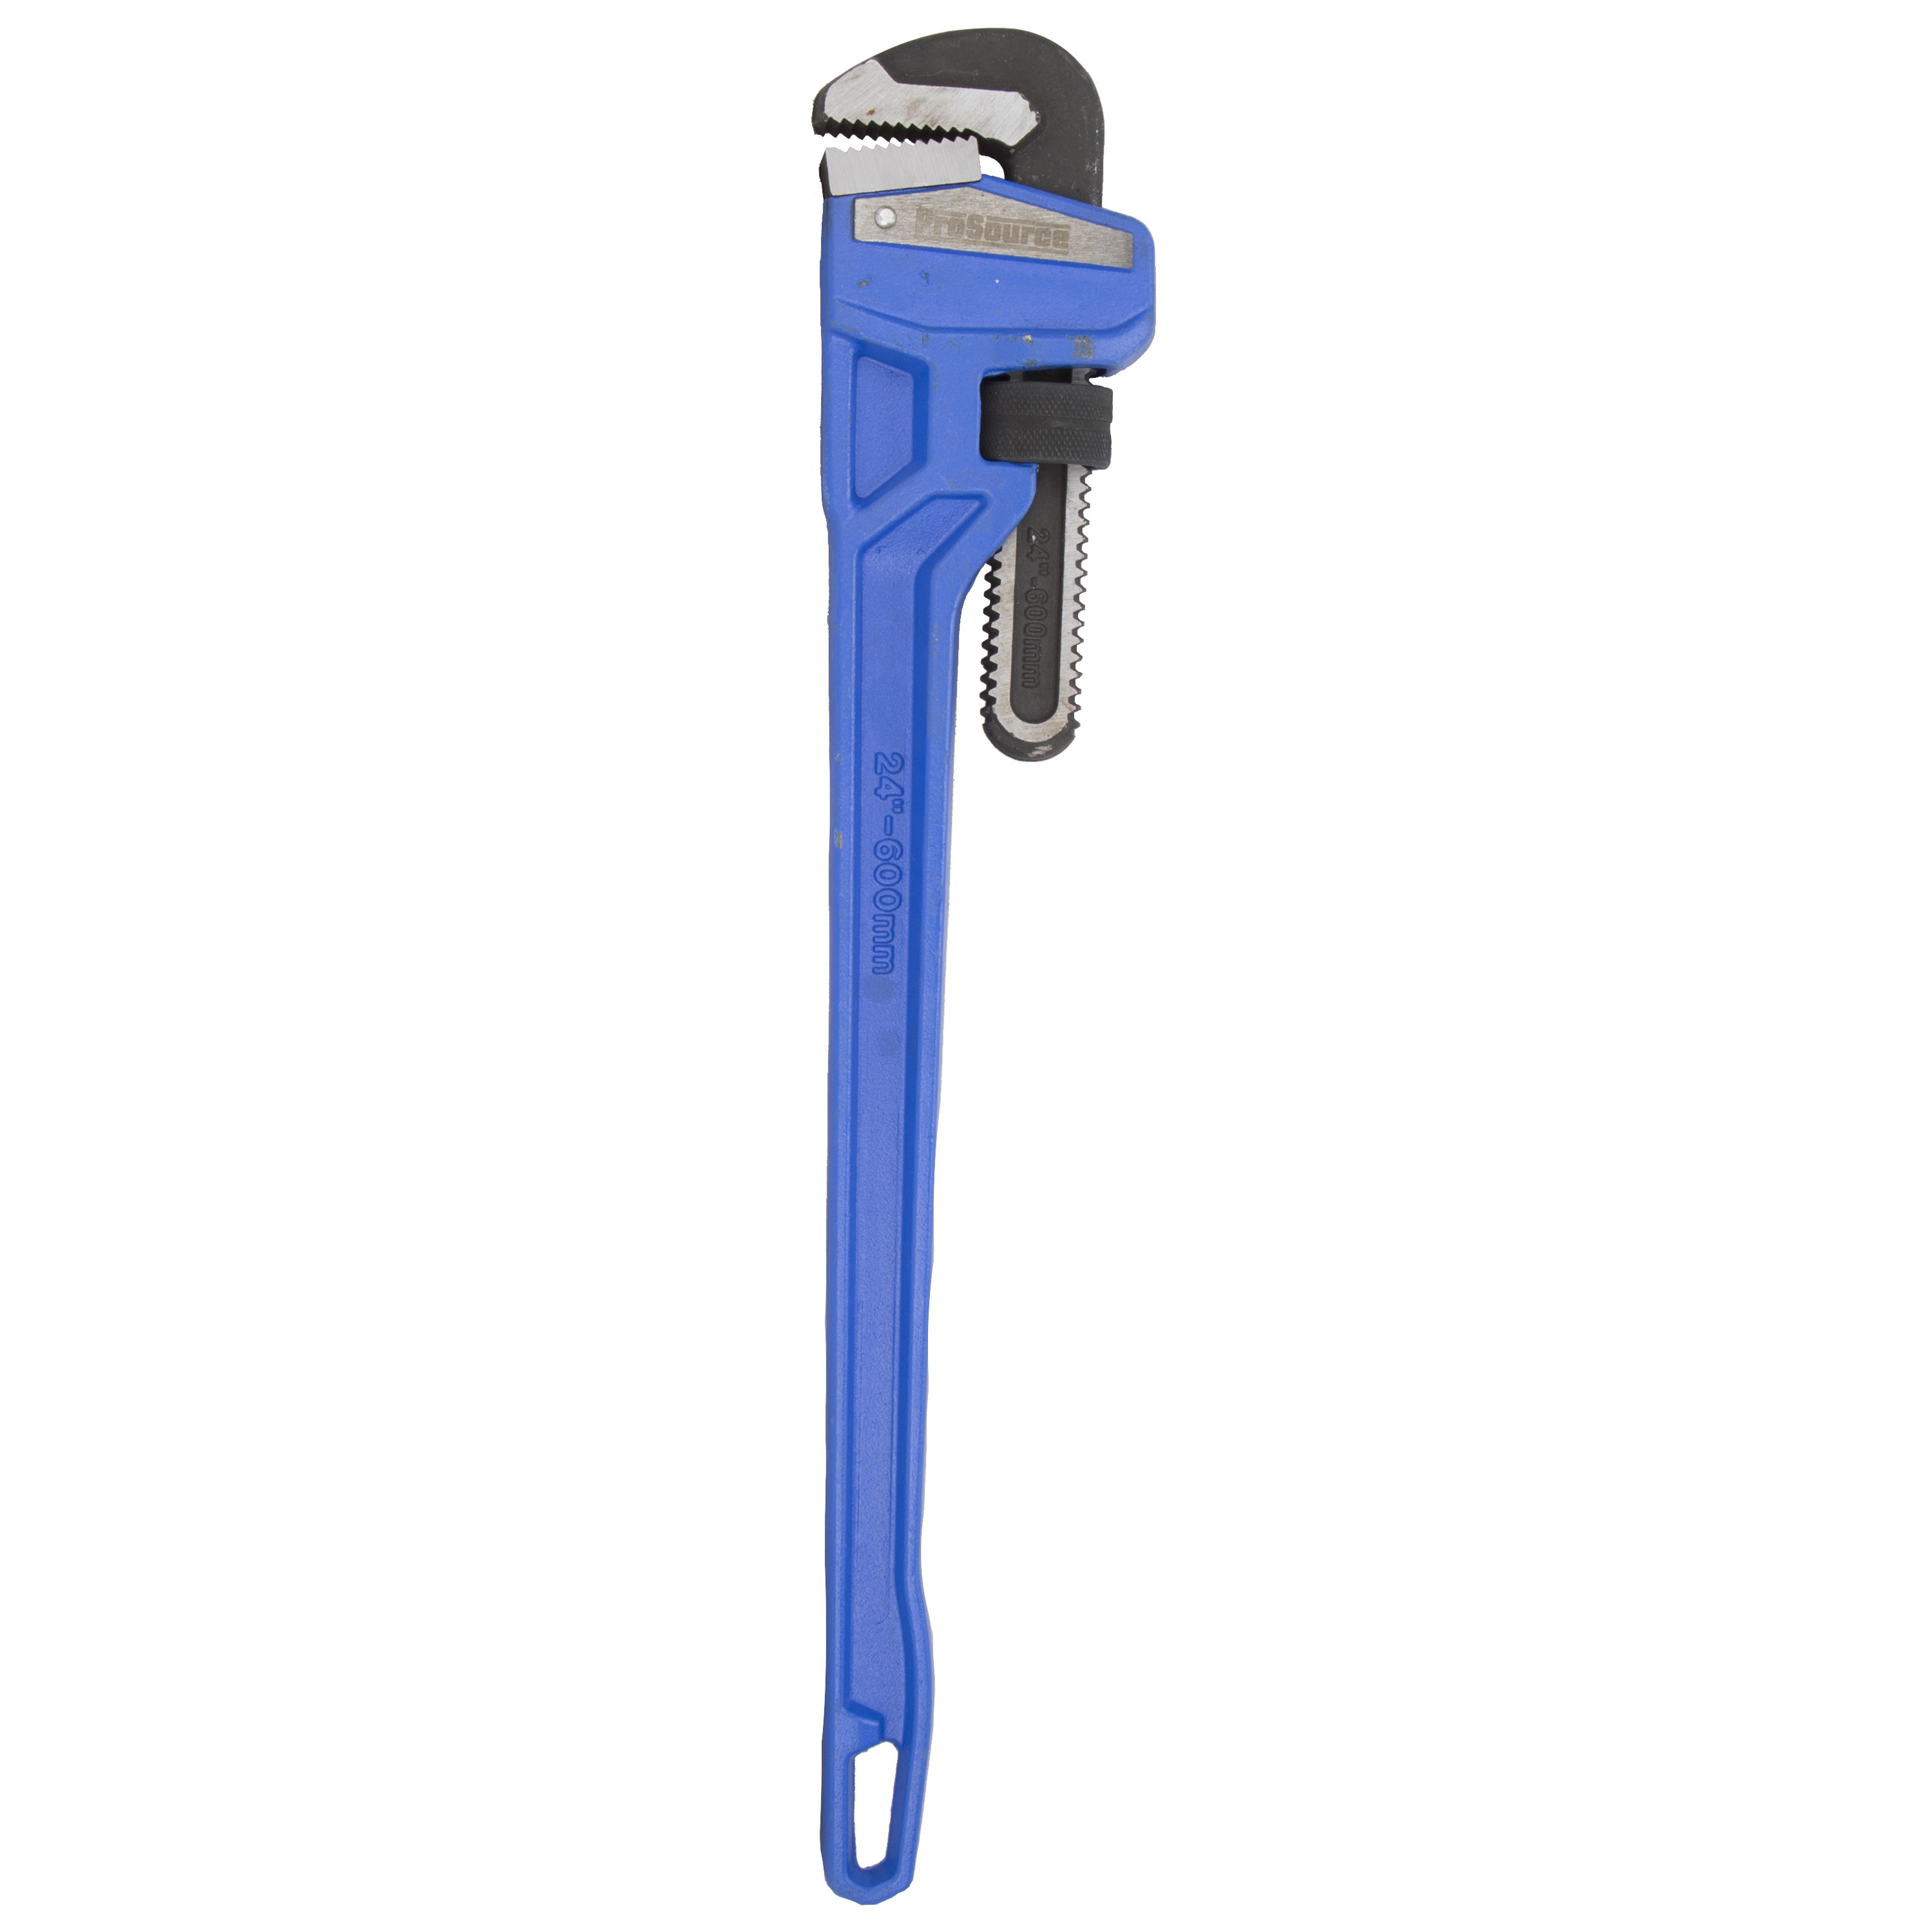 JL40124 Pipe Wrench, 63 mm Jaw, 24 in L, Serrated Jaw, Die-Cast Carbon Steel, Powder-Coated, Heavy-Duty Handle